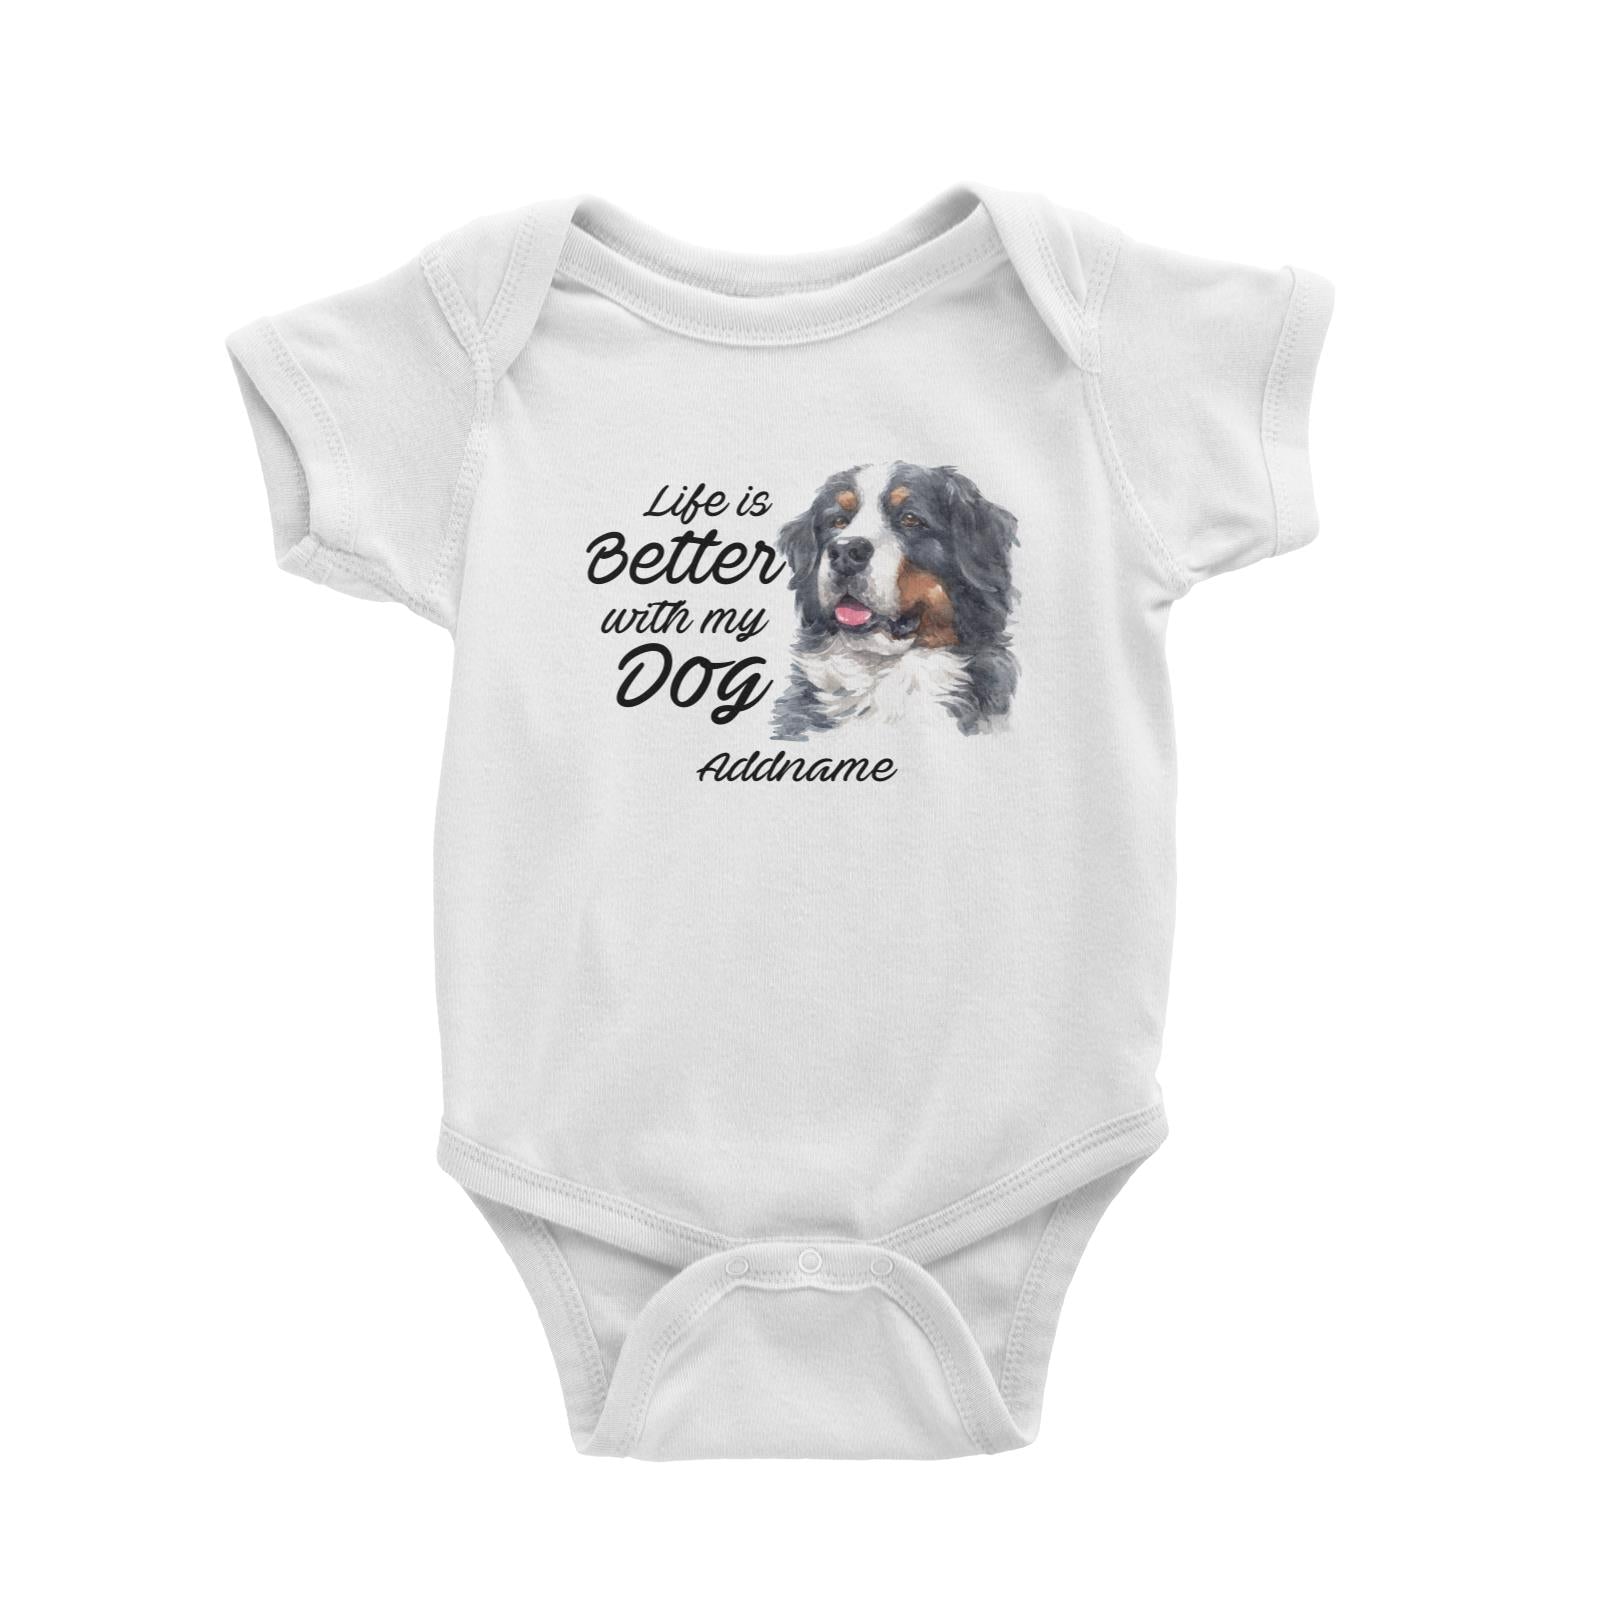 Watercolor Life is Better With My Dog Bernese Mountain Dog Addname Baby Romper